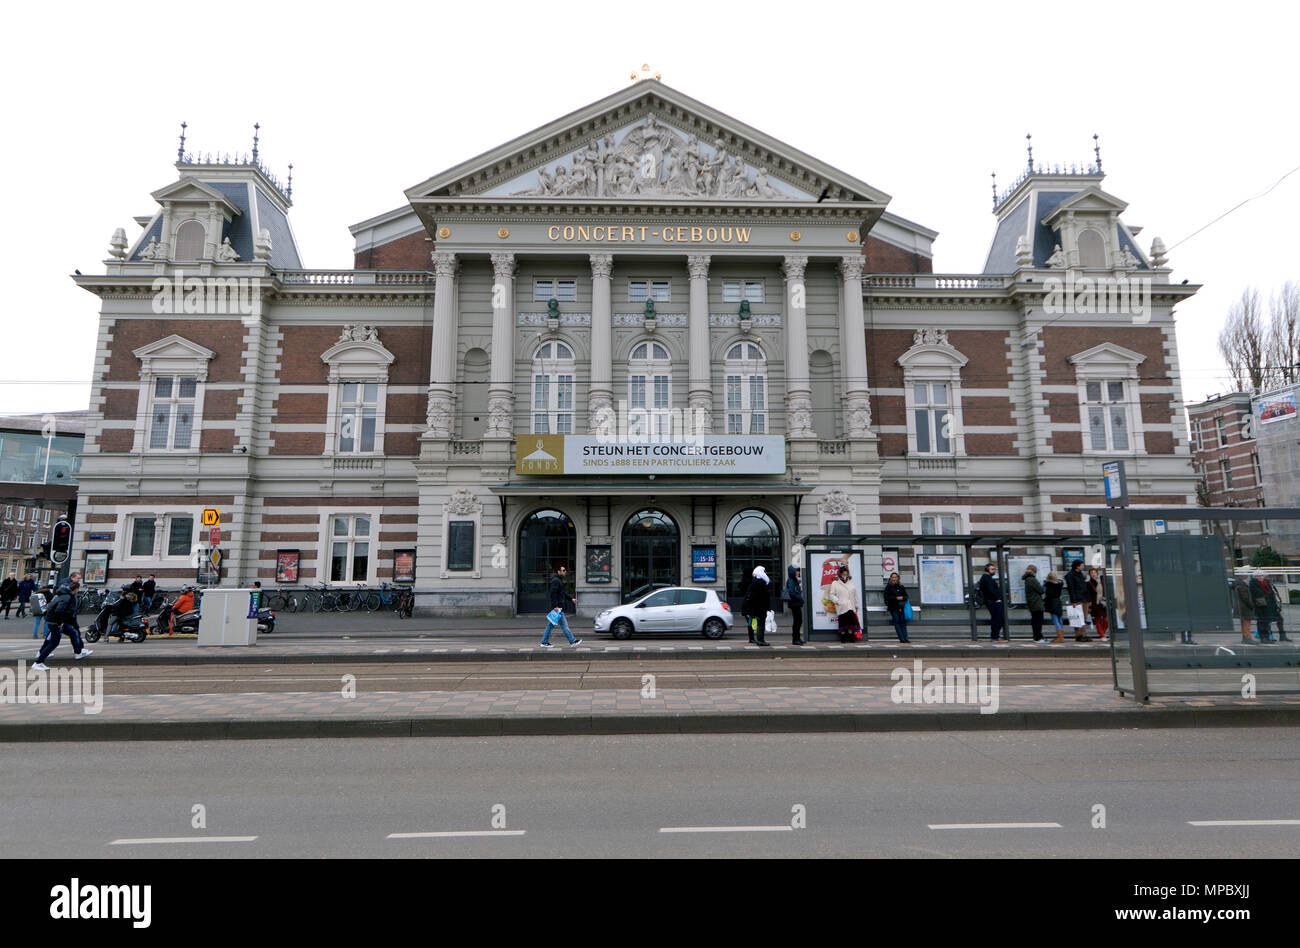 Amsterdam,The Netherlands-february 28,2015: The Royal Concert Hall is a building with several concert halls. The building is the home of the Royal Con Stock Photo